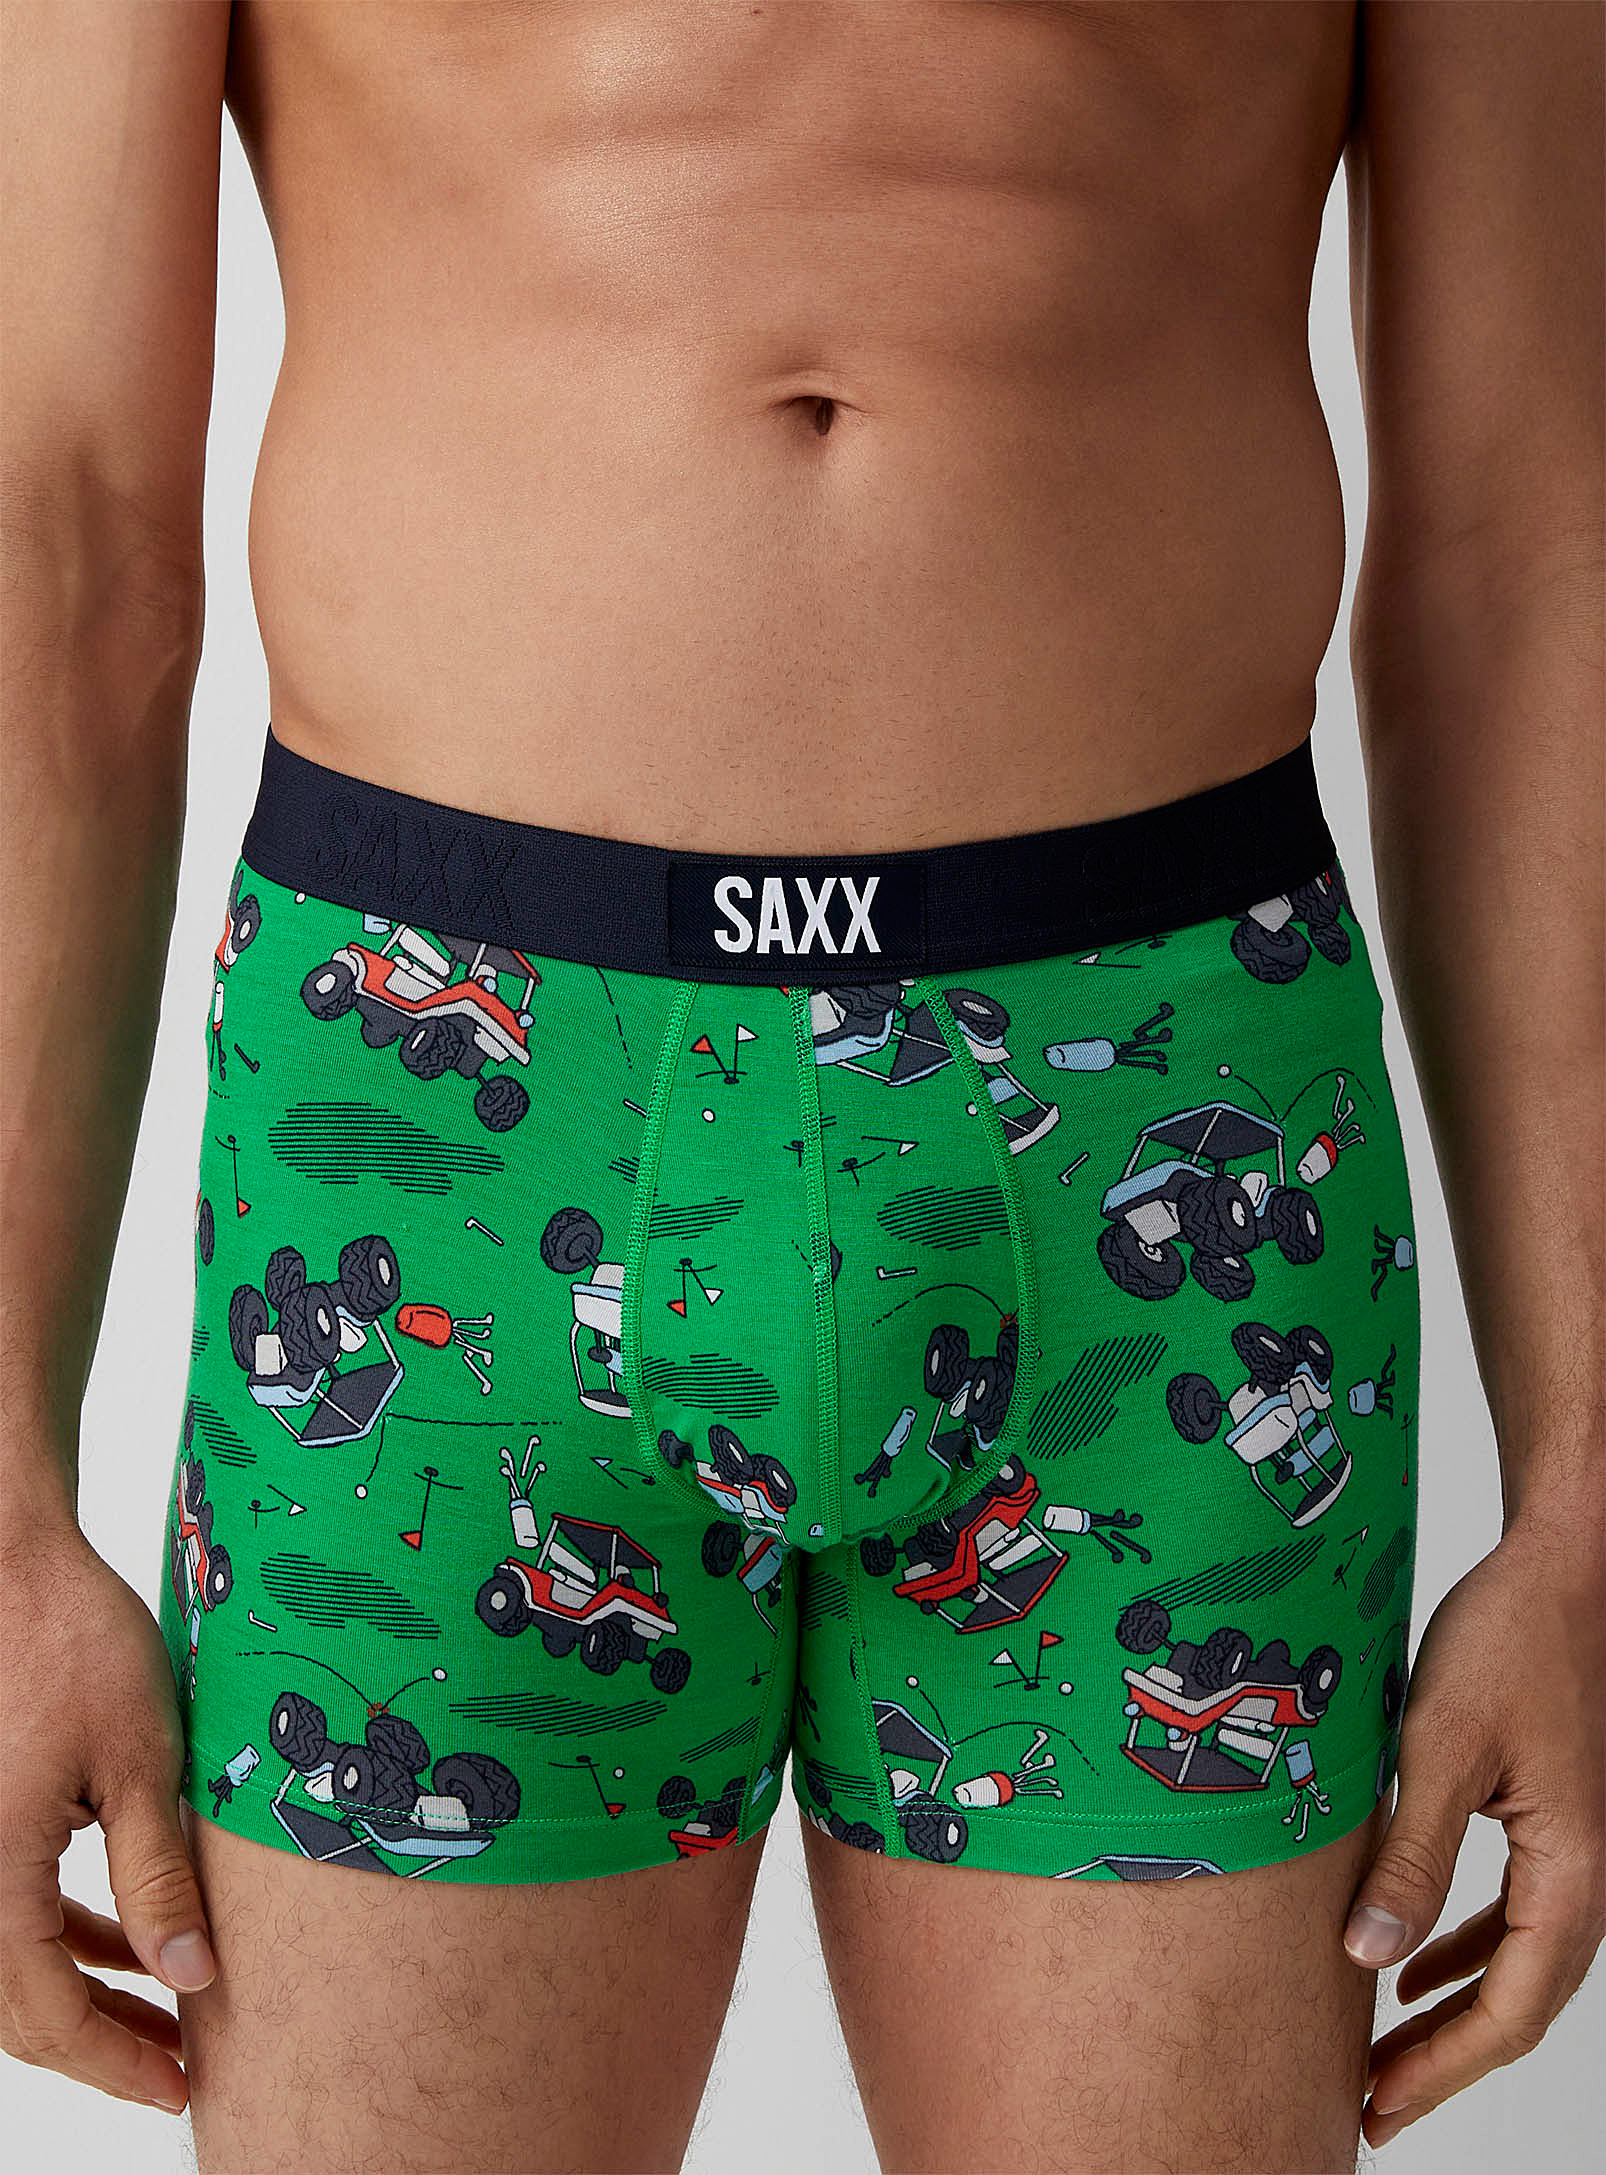 everyday boxer briefs | Square One